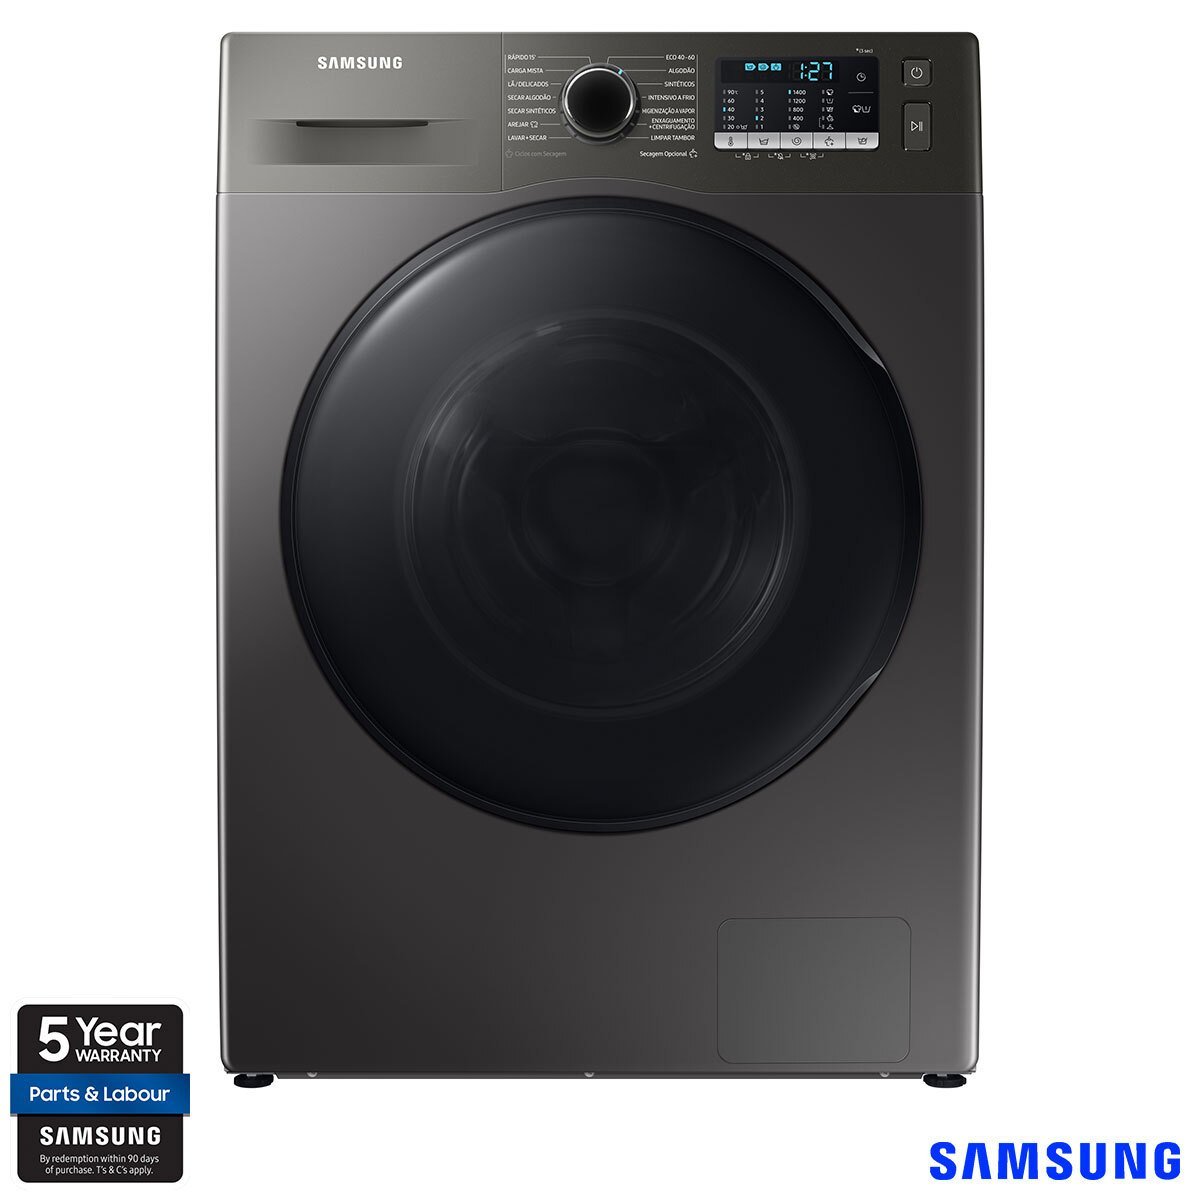 Samsung WD90TA046BX/EU, 9kg/6kg, 1400rpm, Washer Dryer, B Rating in Graphite - Signature Retail Stores